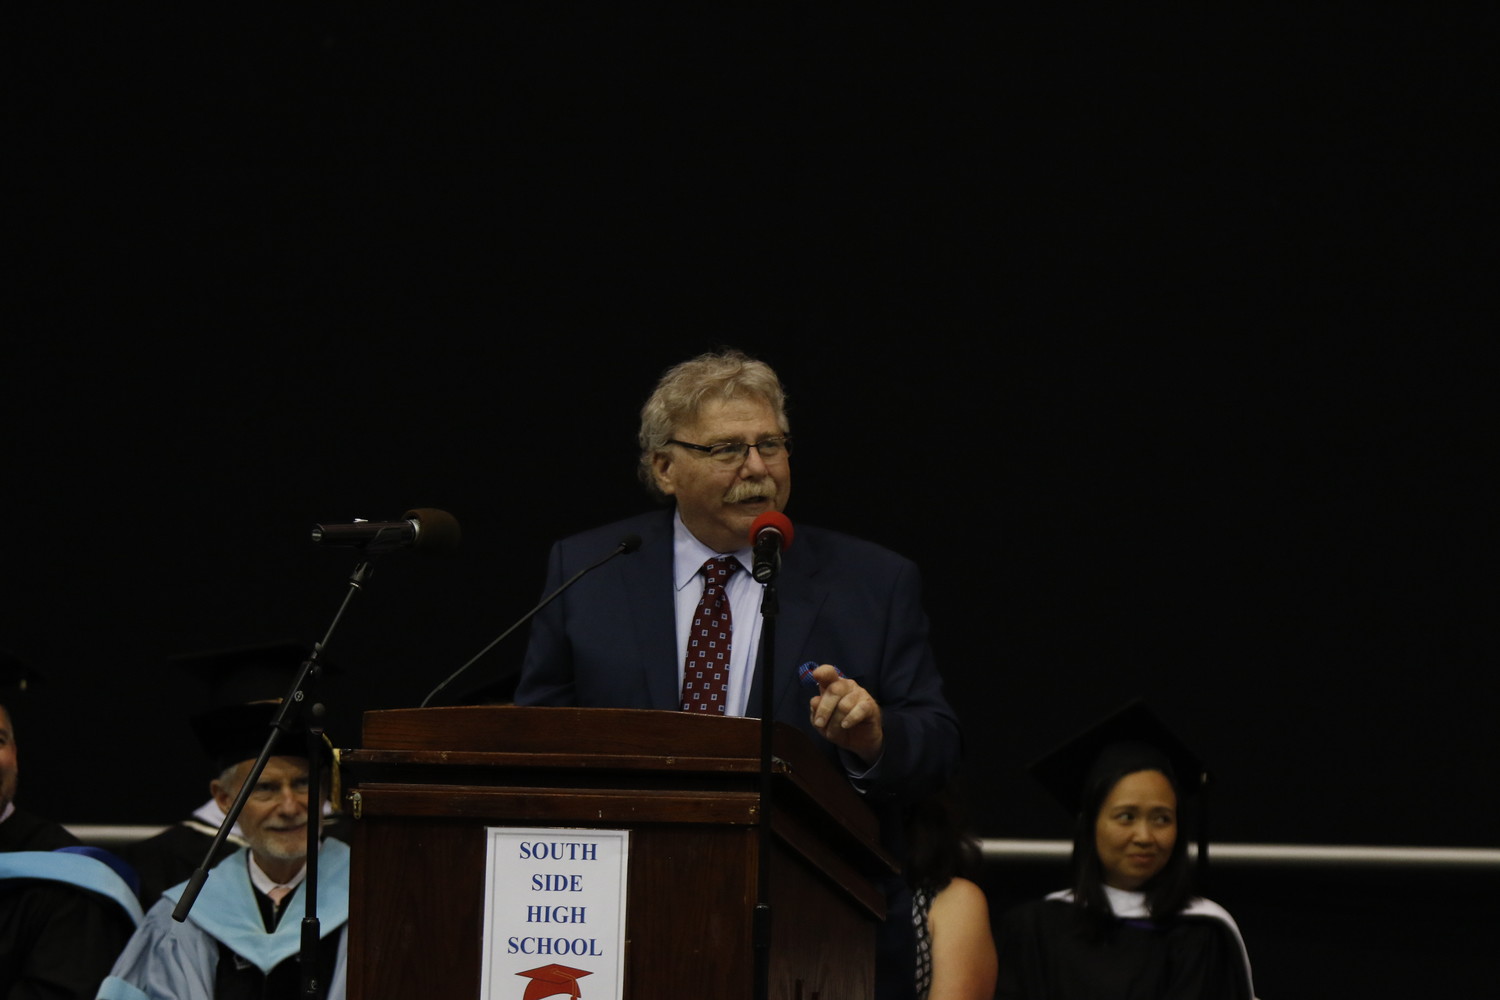 Mark Masin, pictured at last year's South Side High School graduation, decided not to run for re-election after 15 years on the Board of Education.